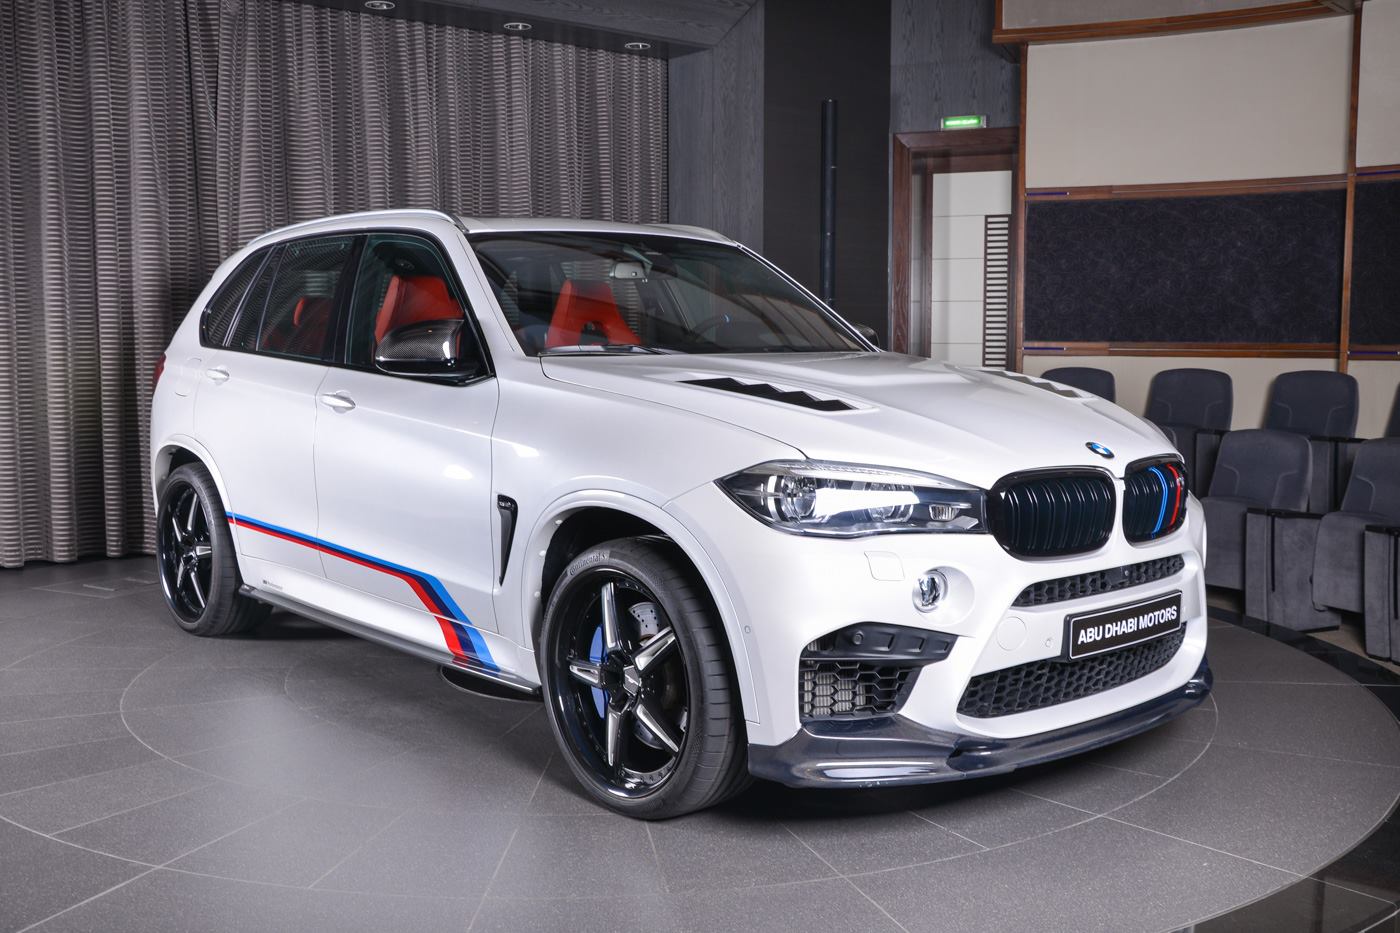 BMW X5 M Gets Seriously Upgraded in Abu Dhabi